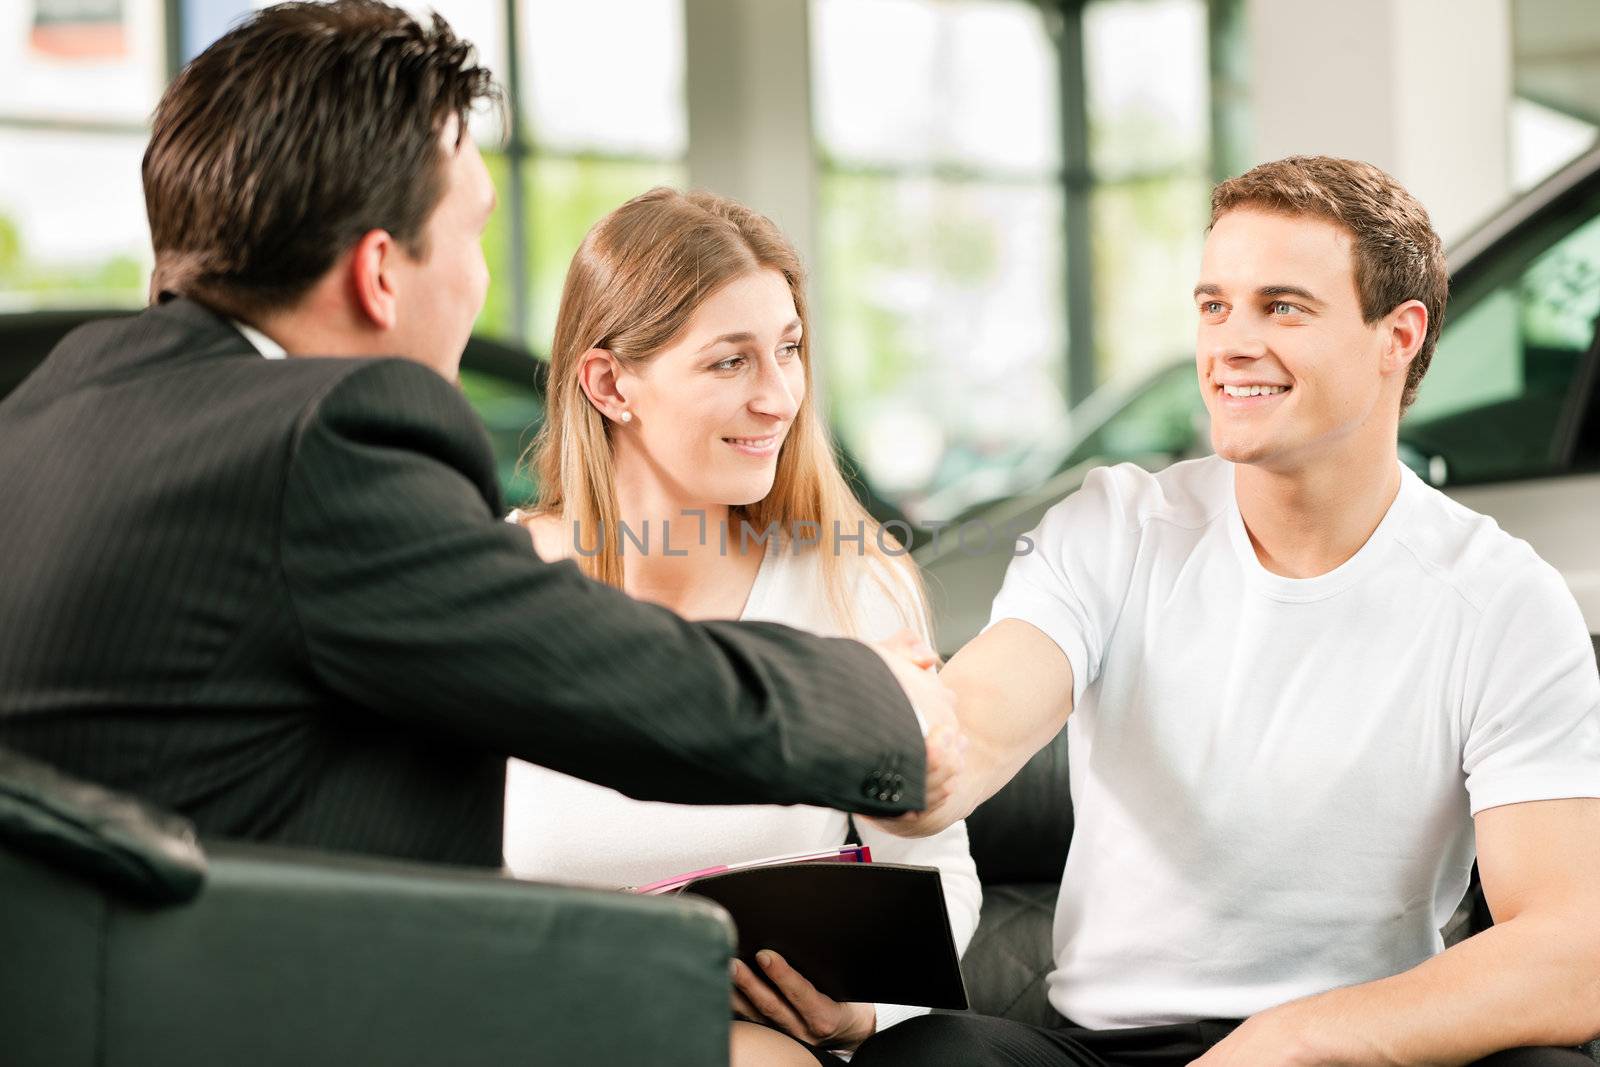 Sales situation in a car dealership, the dealer is shaking hands with a young couple, they want the car in the backgroundSales situation in a car dealership, the dealer is shaking hands with a young couple, they want the car in the background